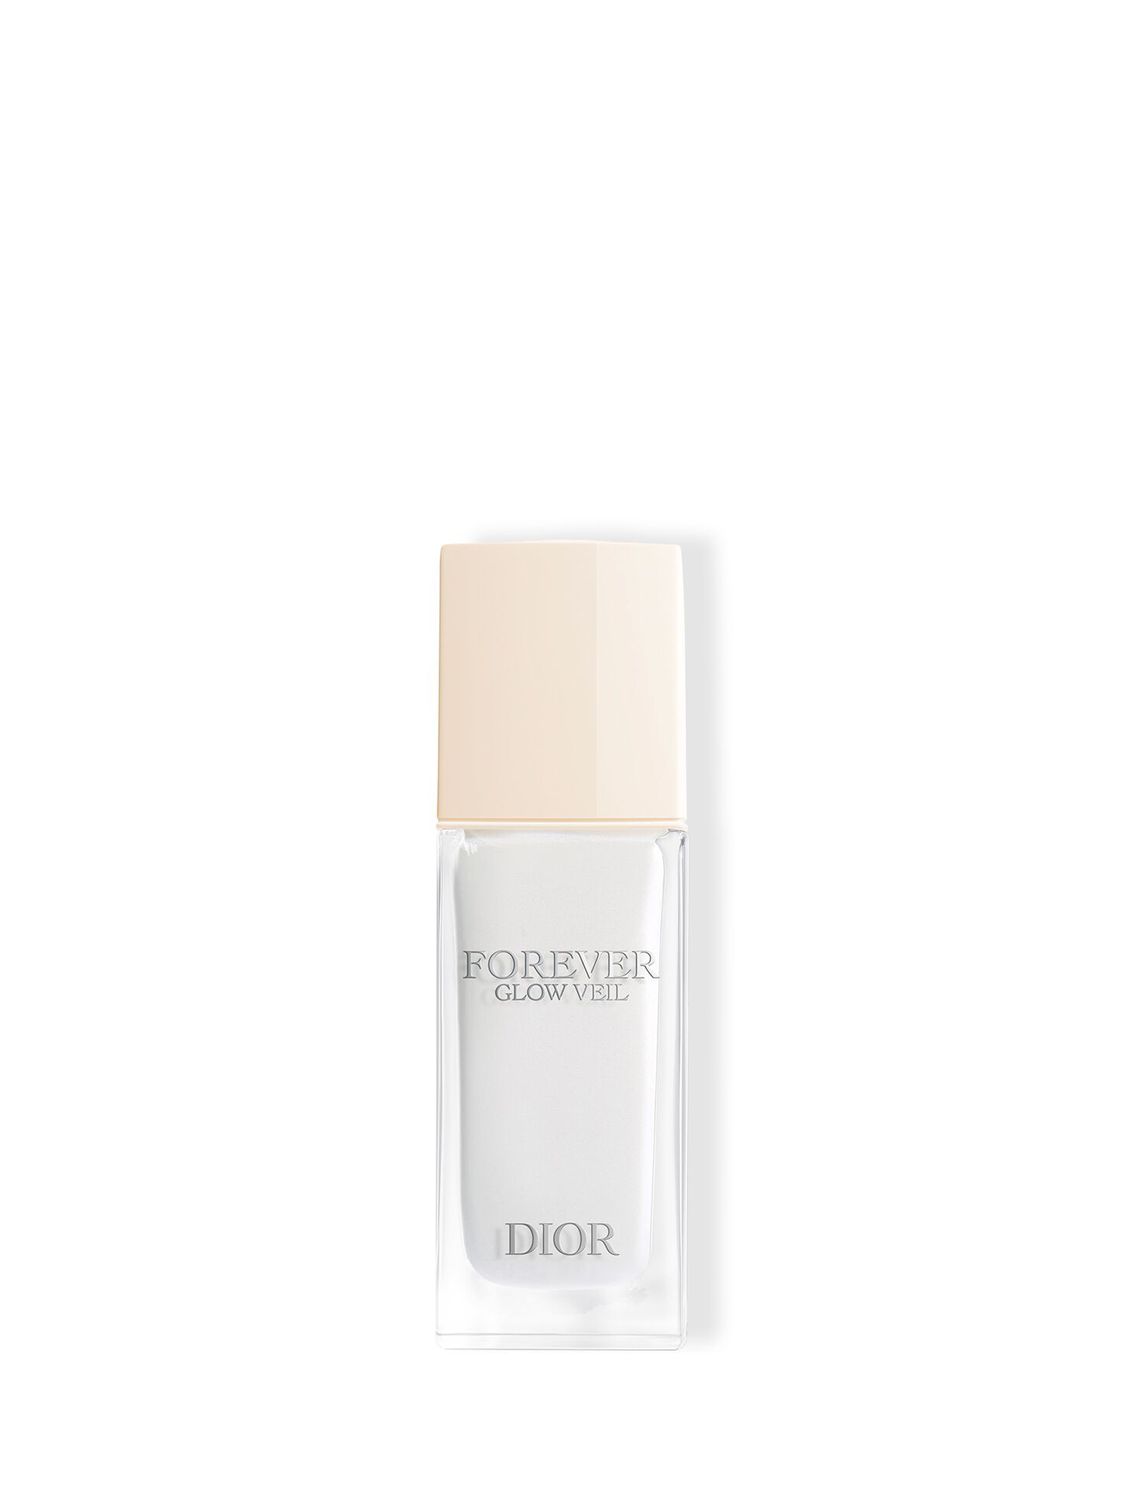 DIOR Forever Glow 30ml at John Lewis & Partners